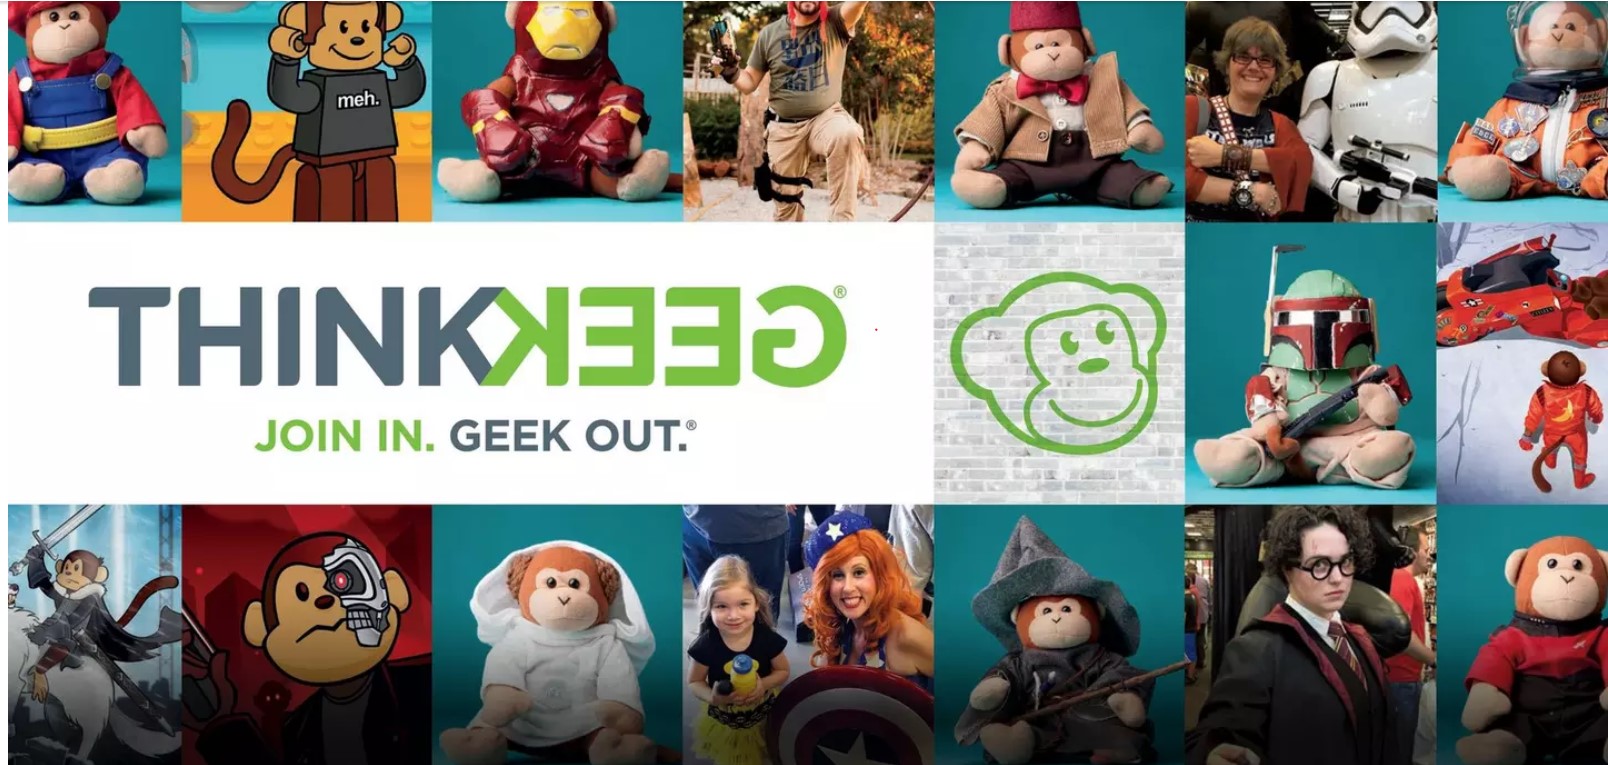 Find detailed information about ThinkGeek